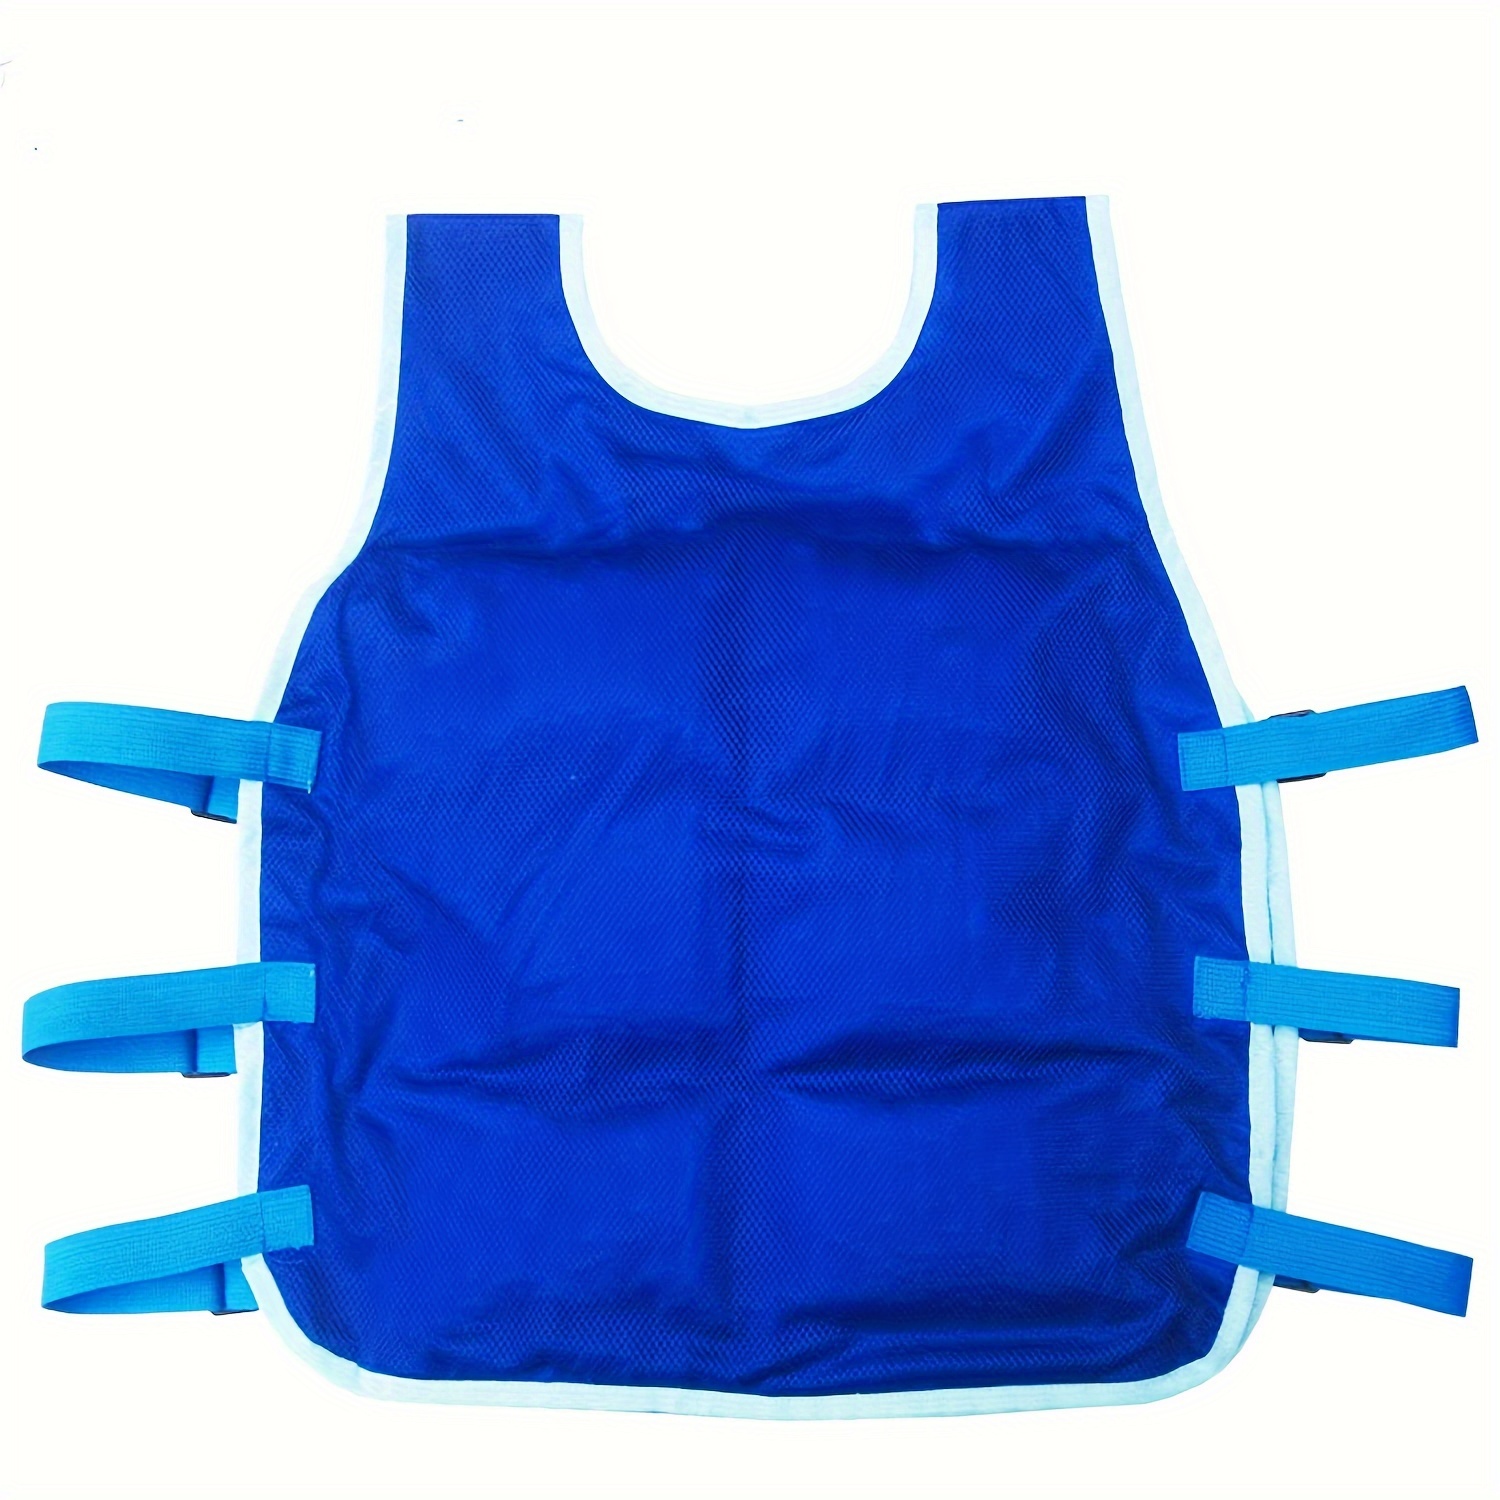 

Unisex Cooling Vest With 12 Ice Packs - Breathable, Adjustable & Reusable For Outdoor Activities Like Fishing, Cycling, Running & Gardening Ice Pack For Cooler